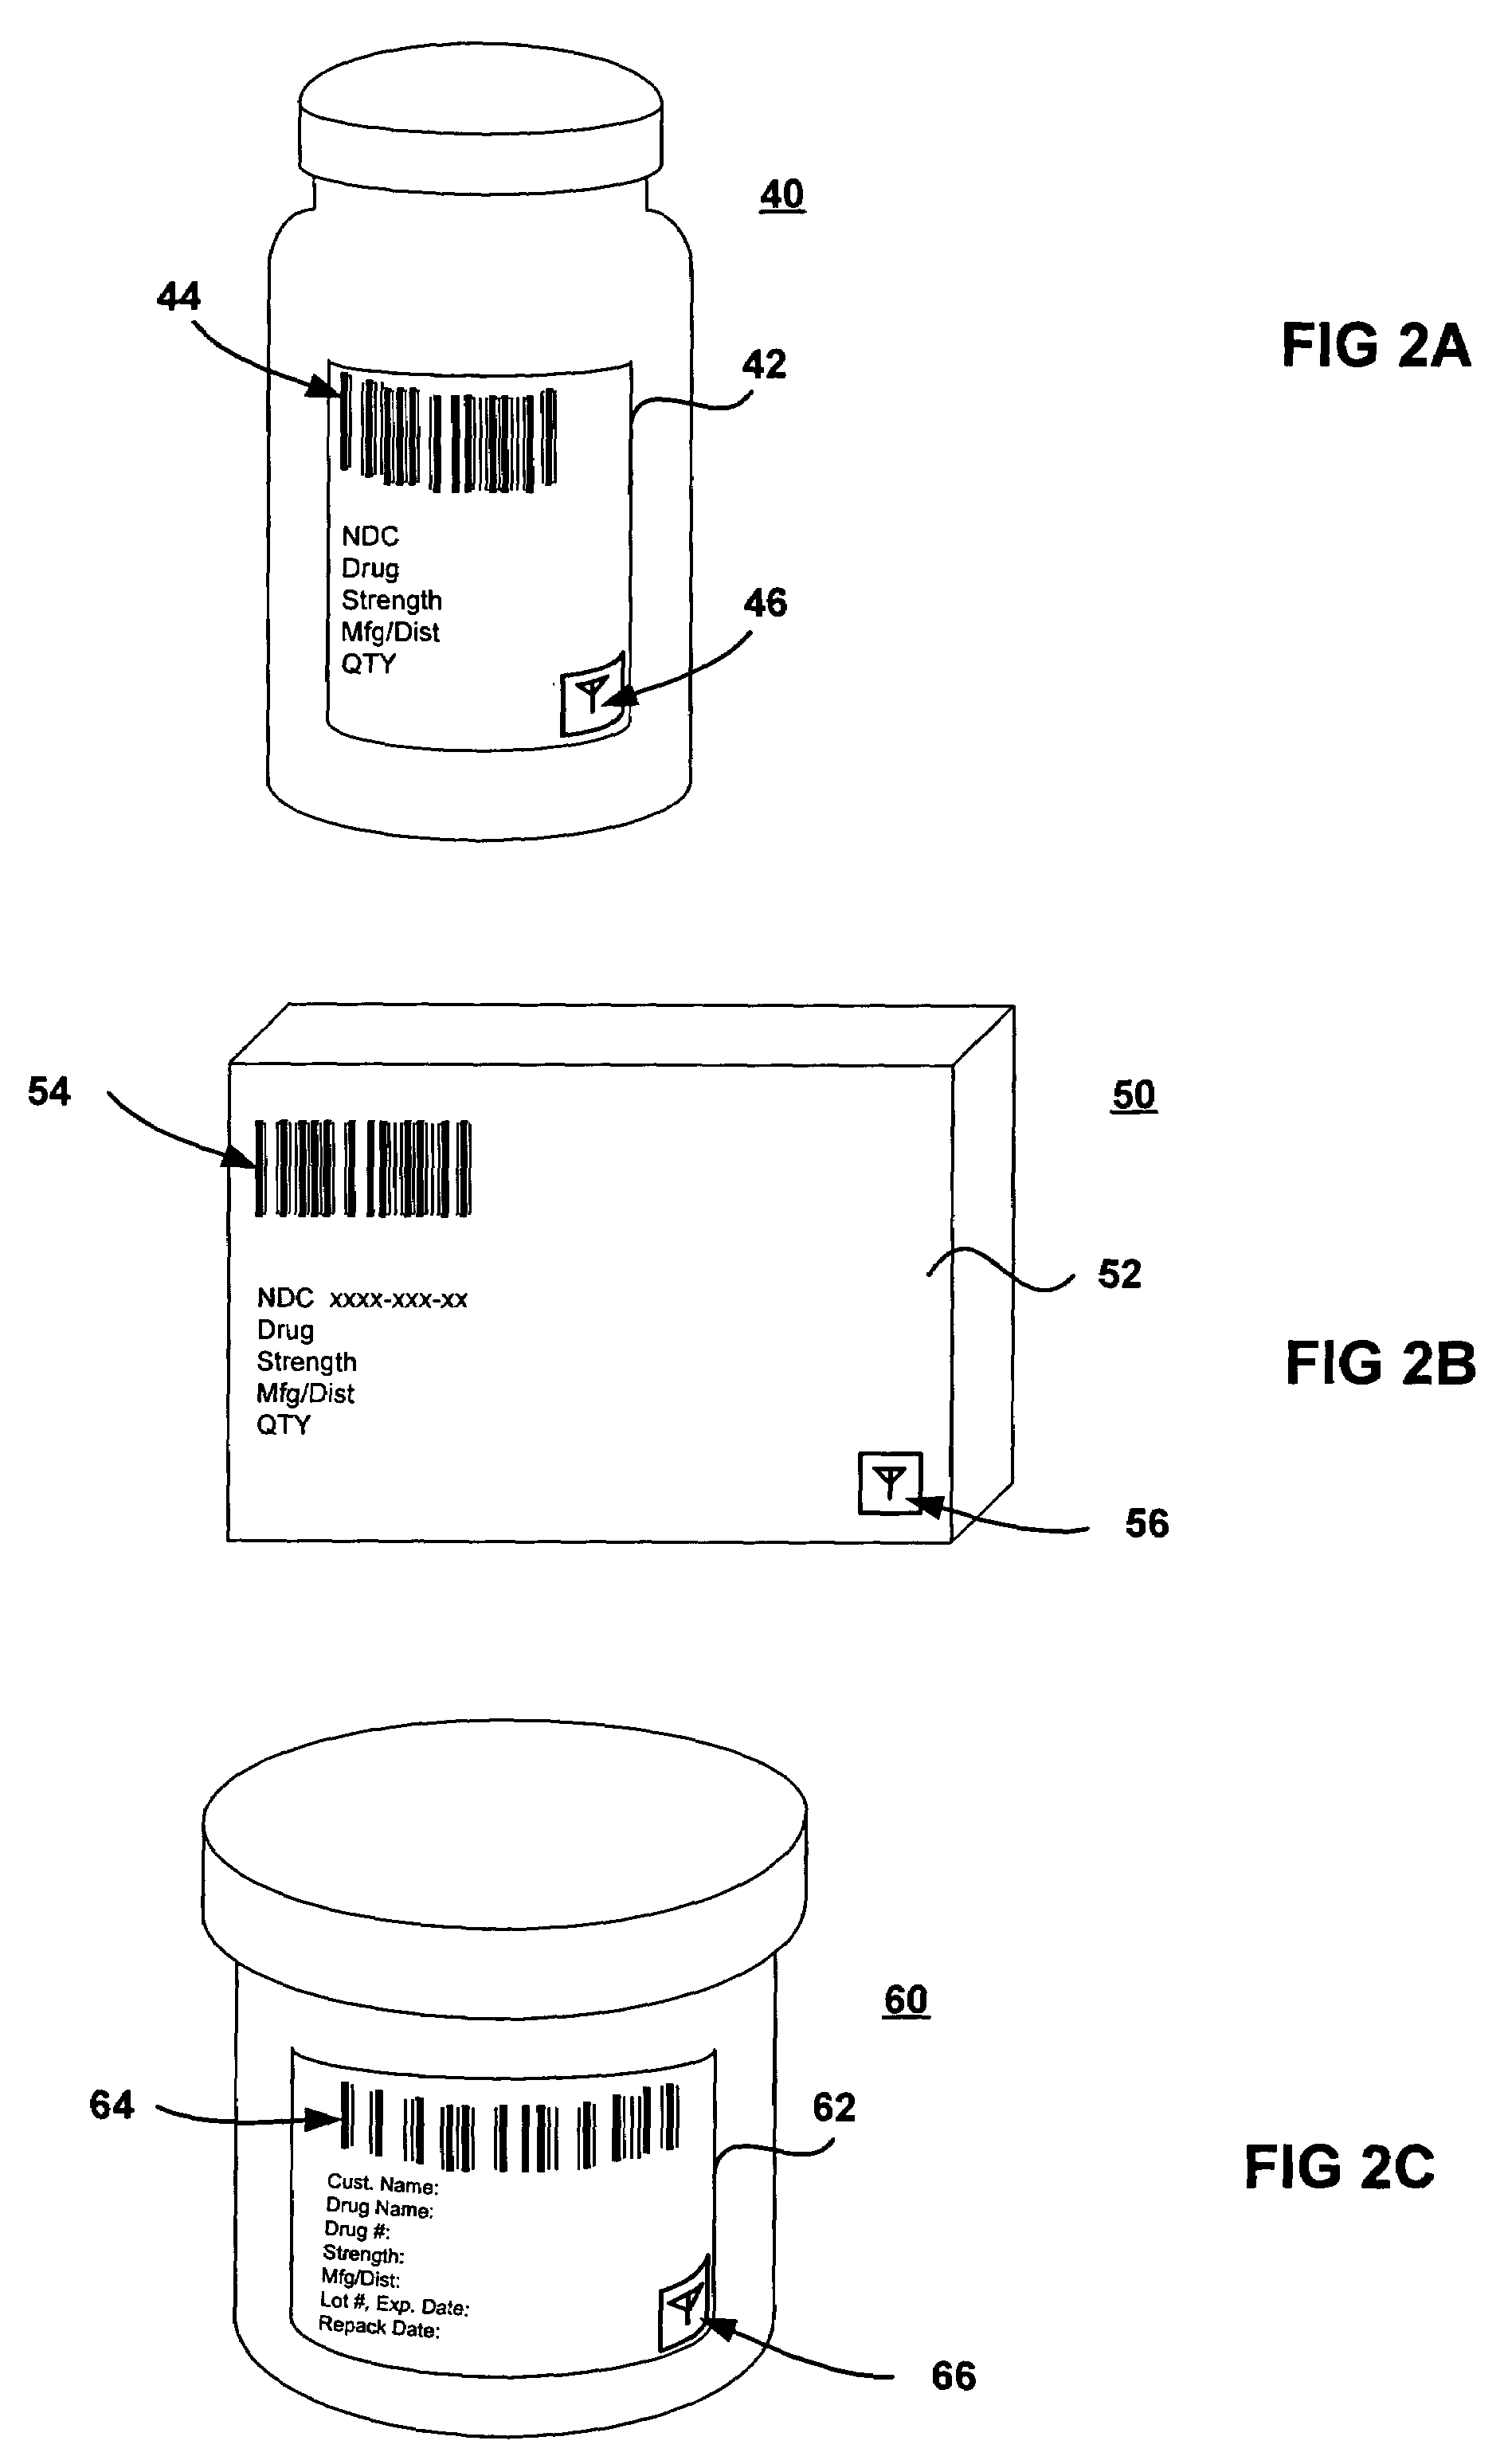 Automated drug substitution, verification, and reporting system